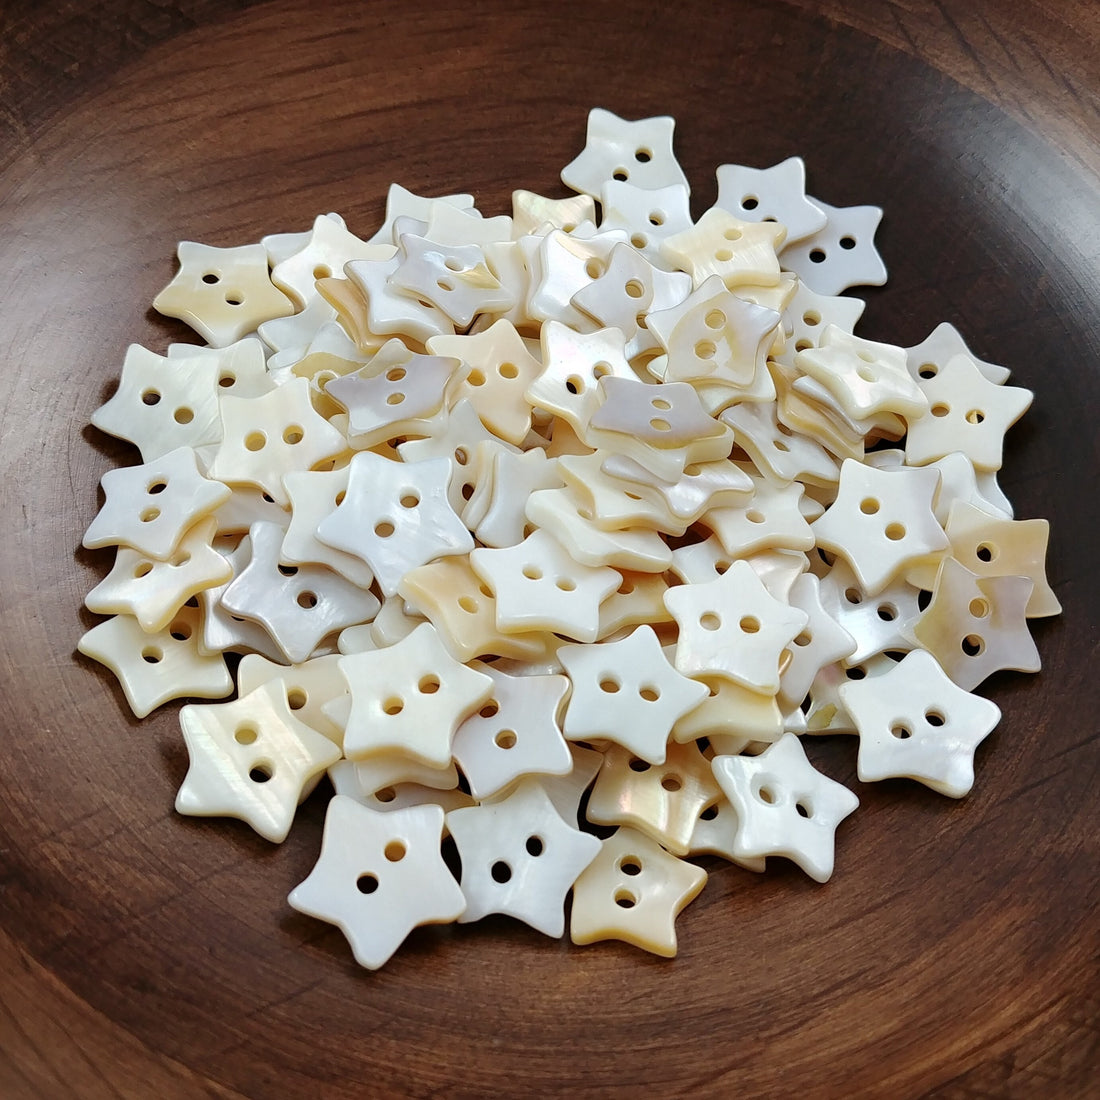 Star shape shell buttons - Freshwater seashell color buttons 12mm - set of 6 celestial buttons